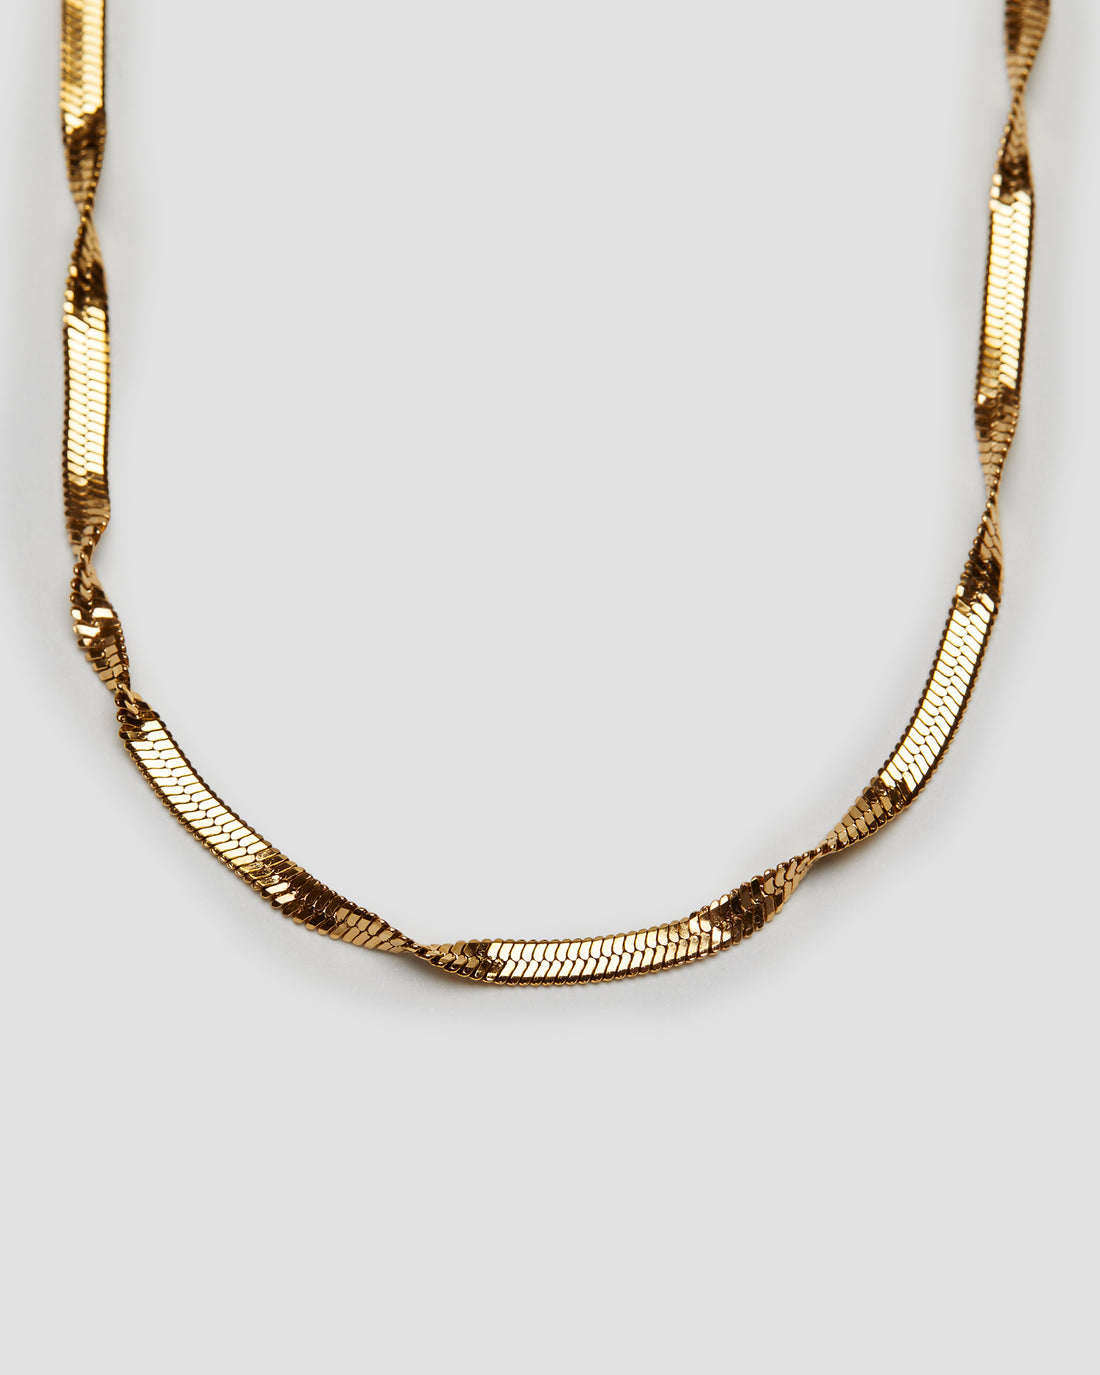 Women’s Gold Jewelry-grise-nyc.com